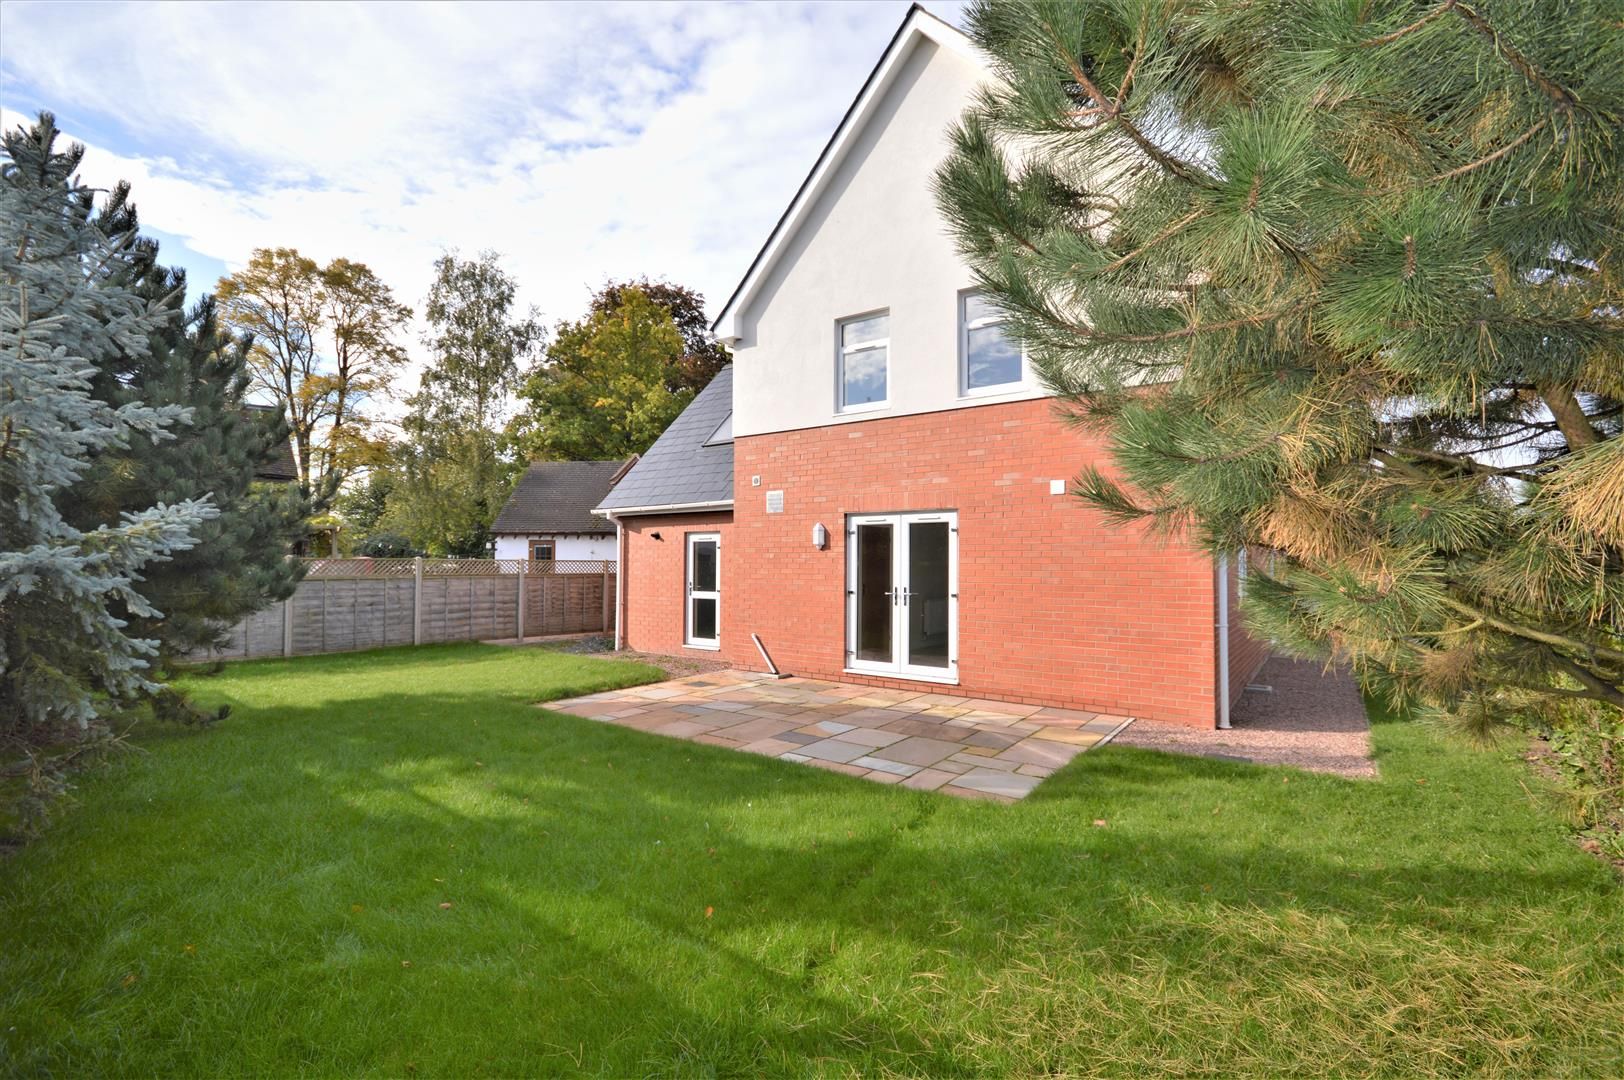 4 bed detached for sale in Kings Acre  - Property Image 1